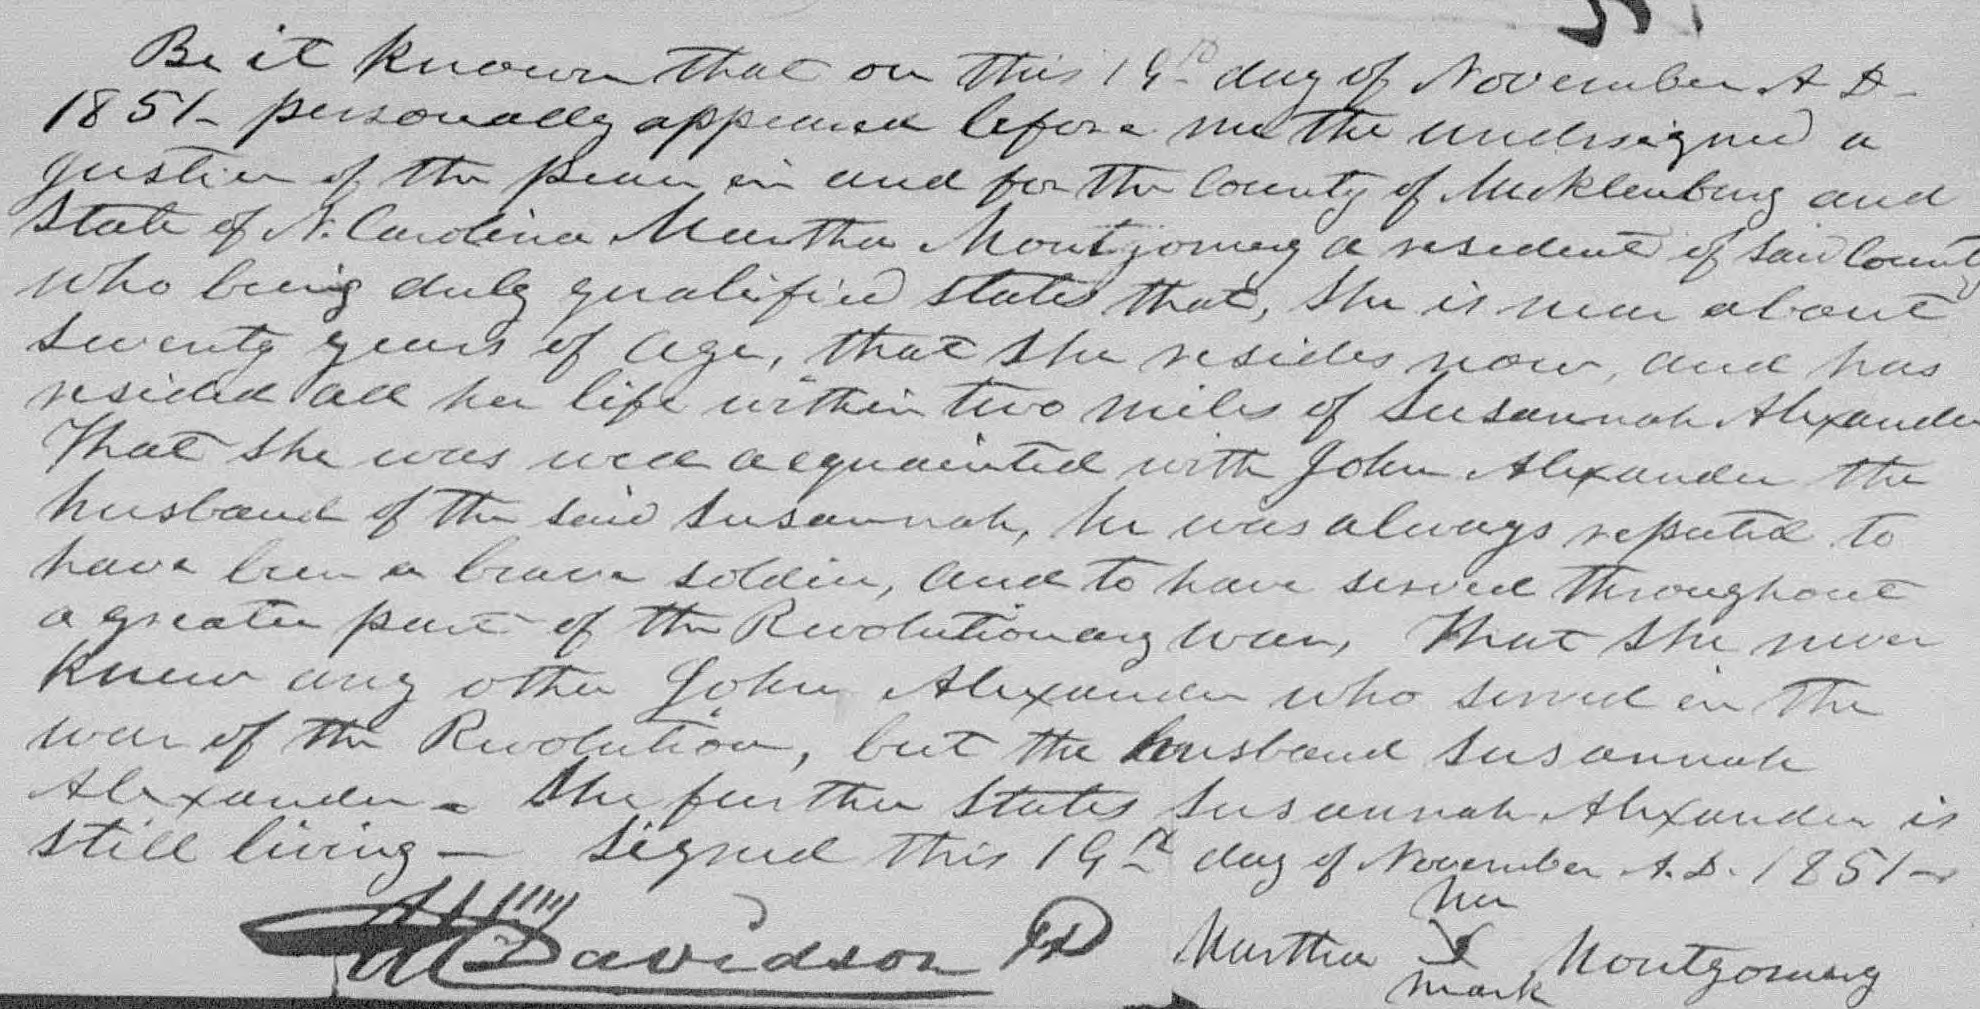 Affidavit of Martha Montgomery in support of a Pension Claim for Susana Alexander, 19 November 1851